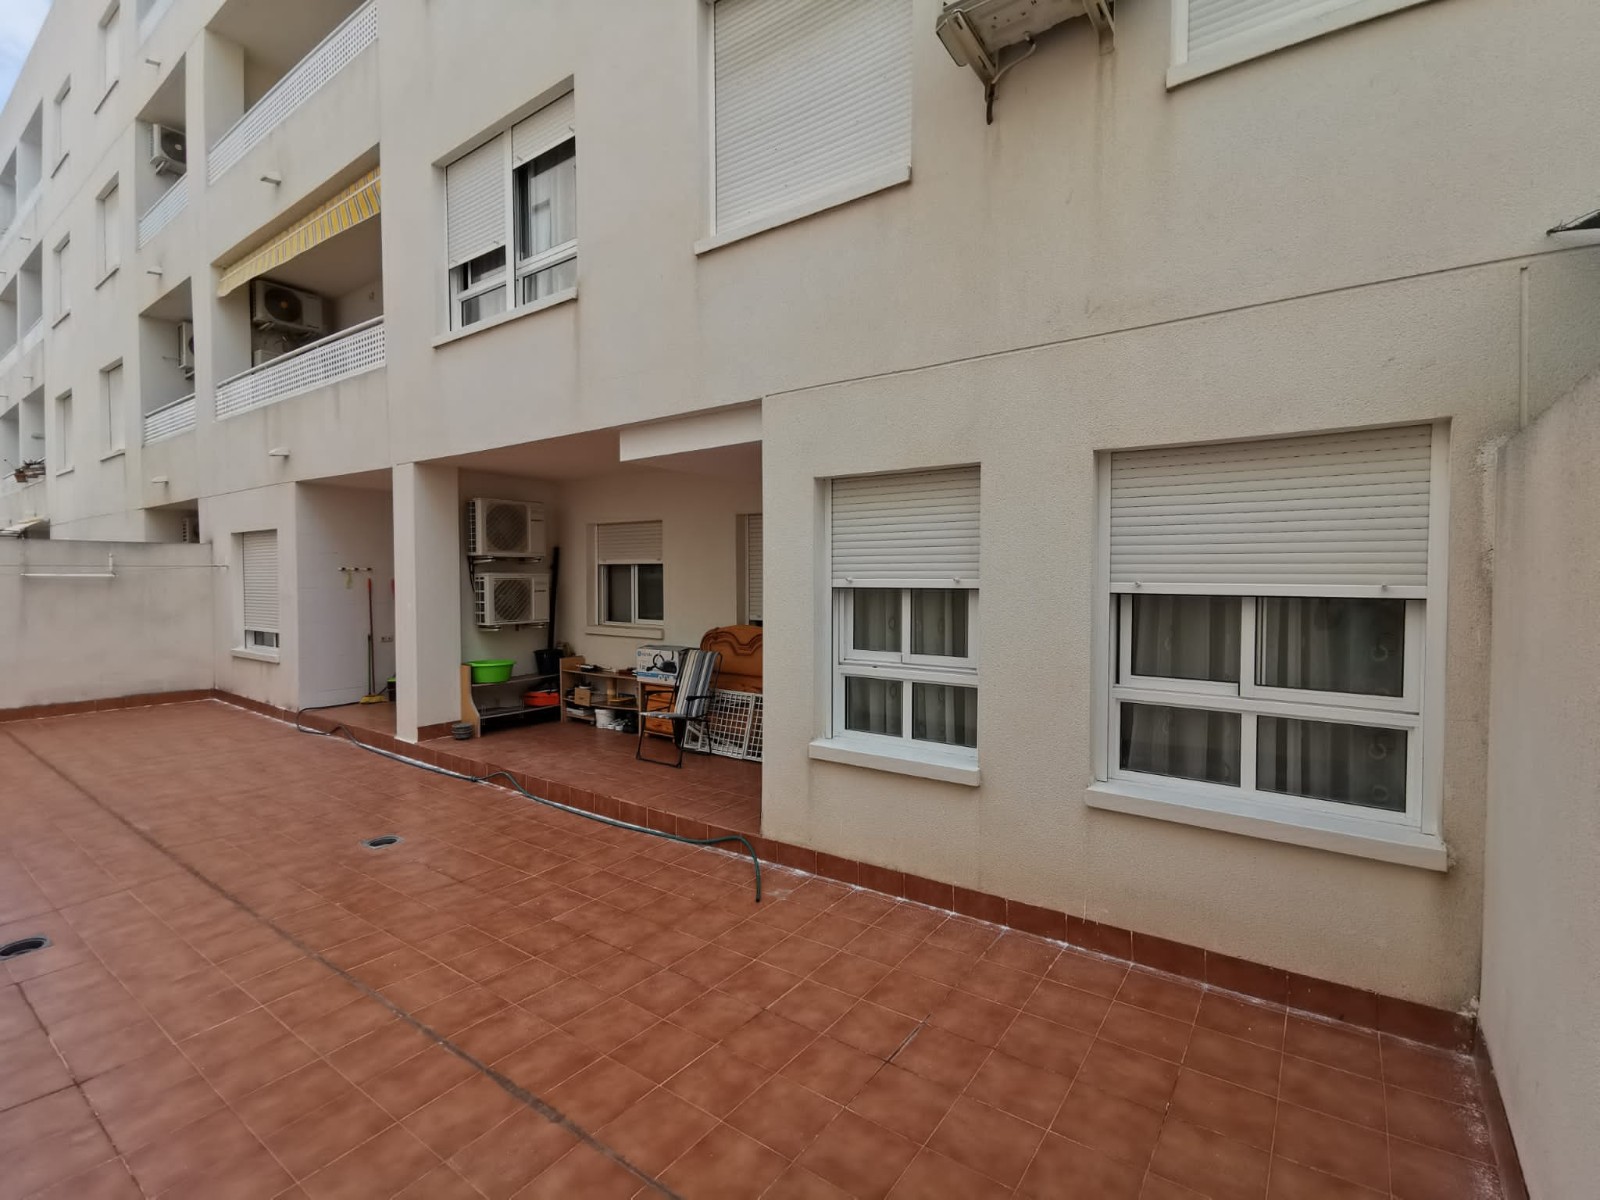 For sale: 3 bedroom apartment / flat in Almoradí